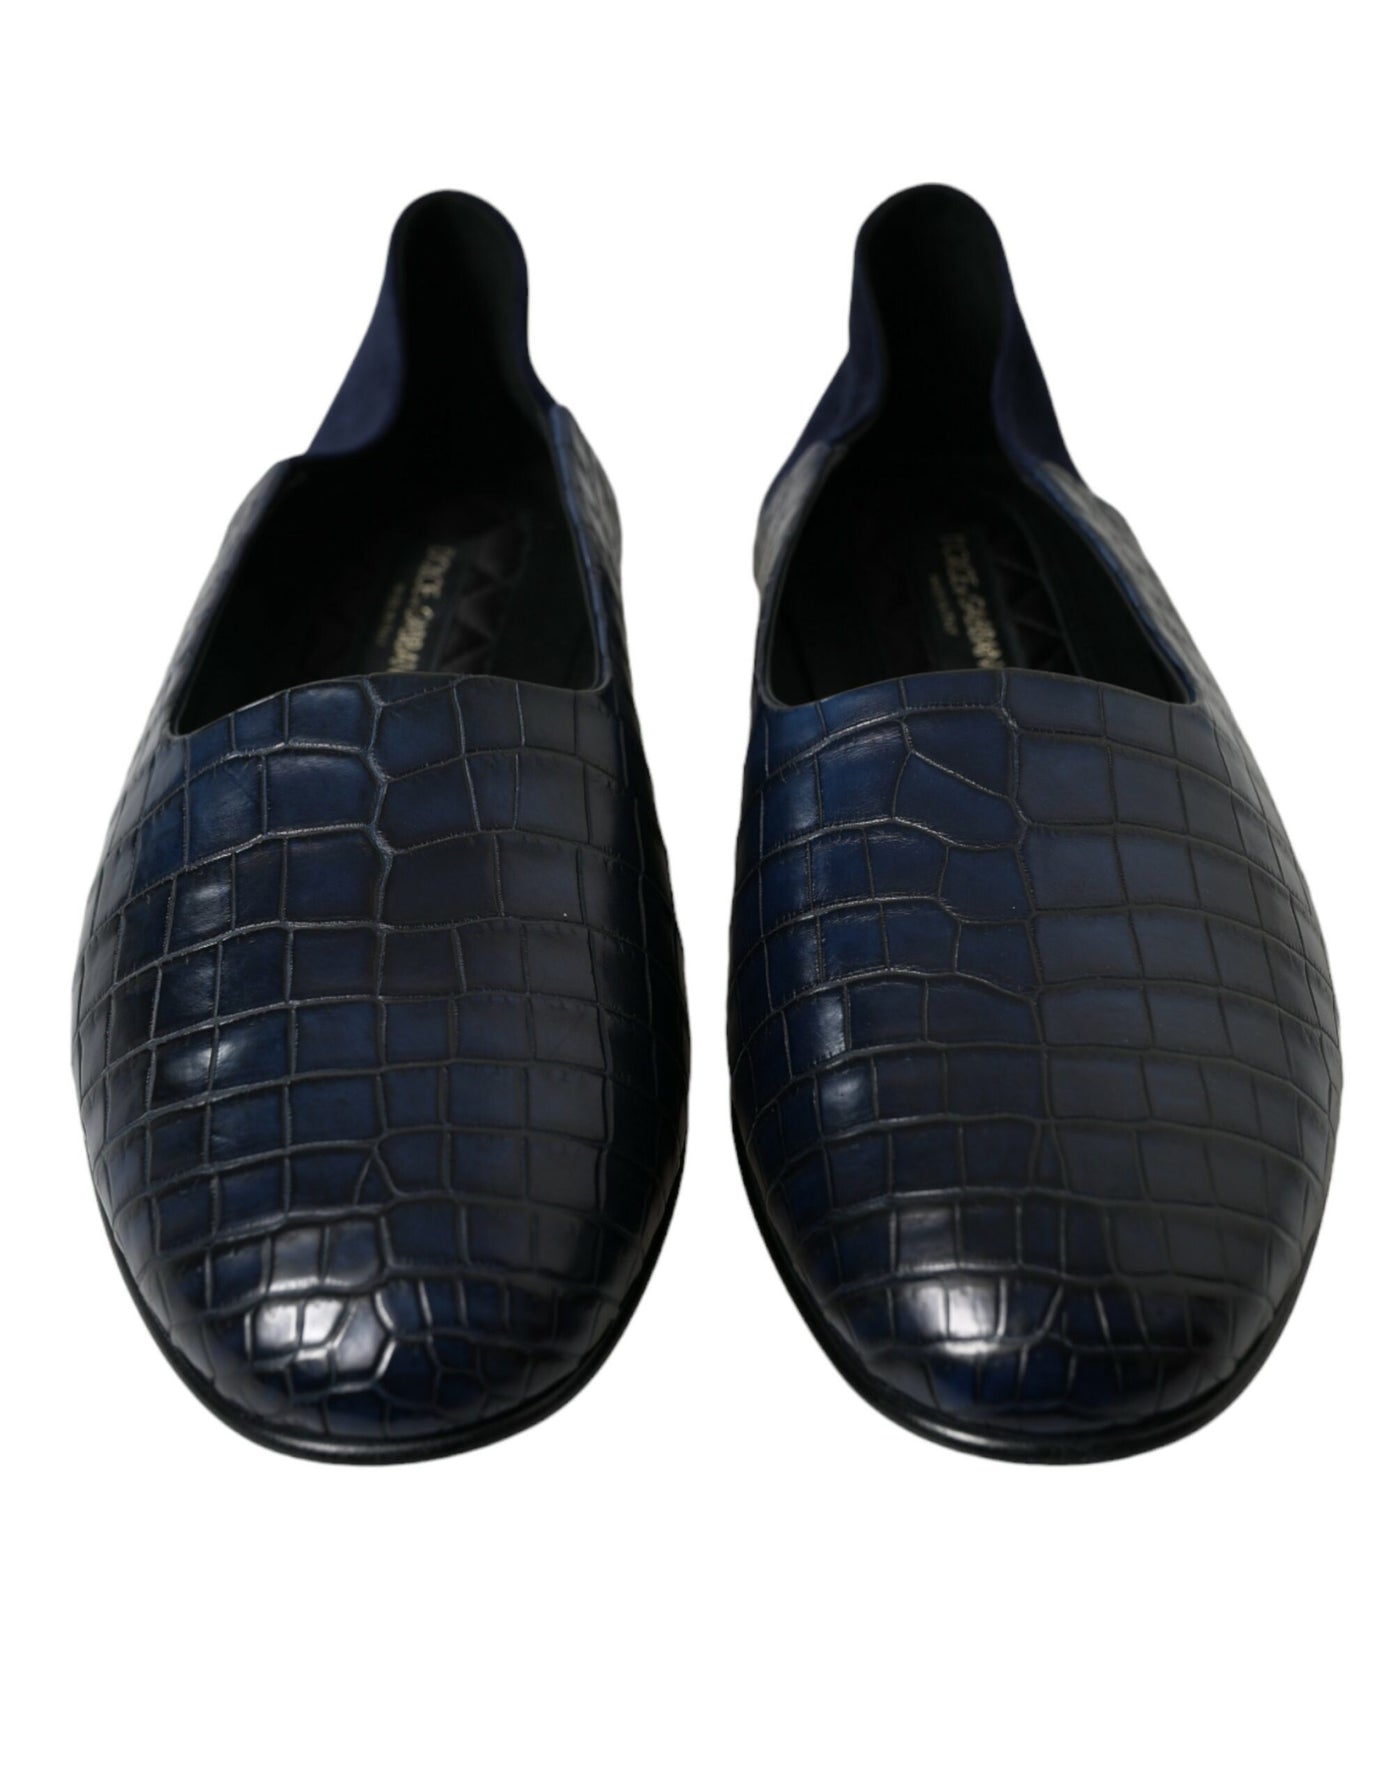 Dolce & Gabbana Blue Crocodile Leather Loafers Slip On Shoes